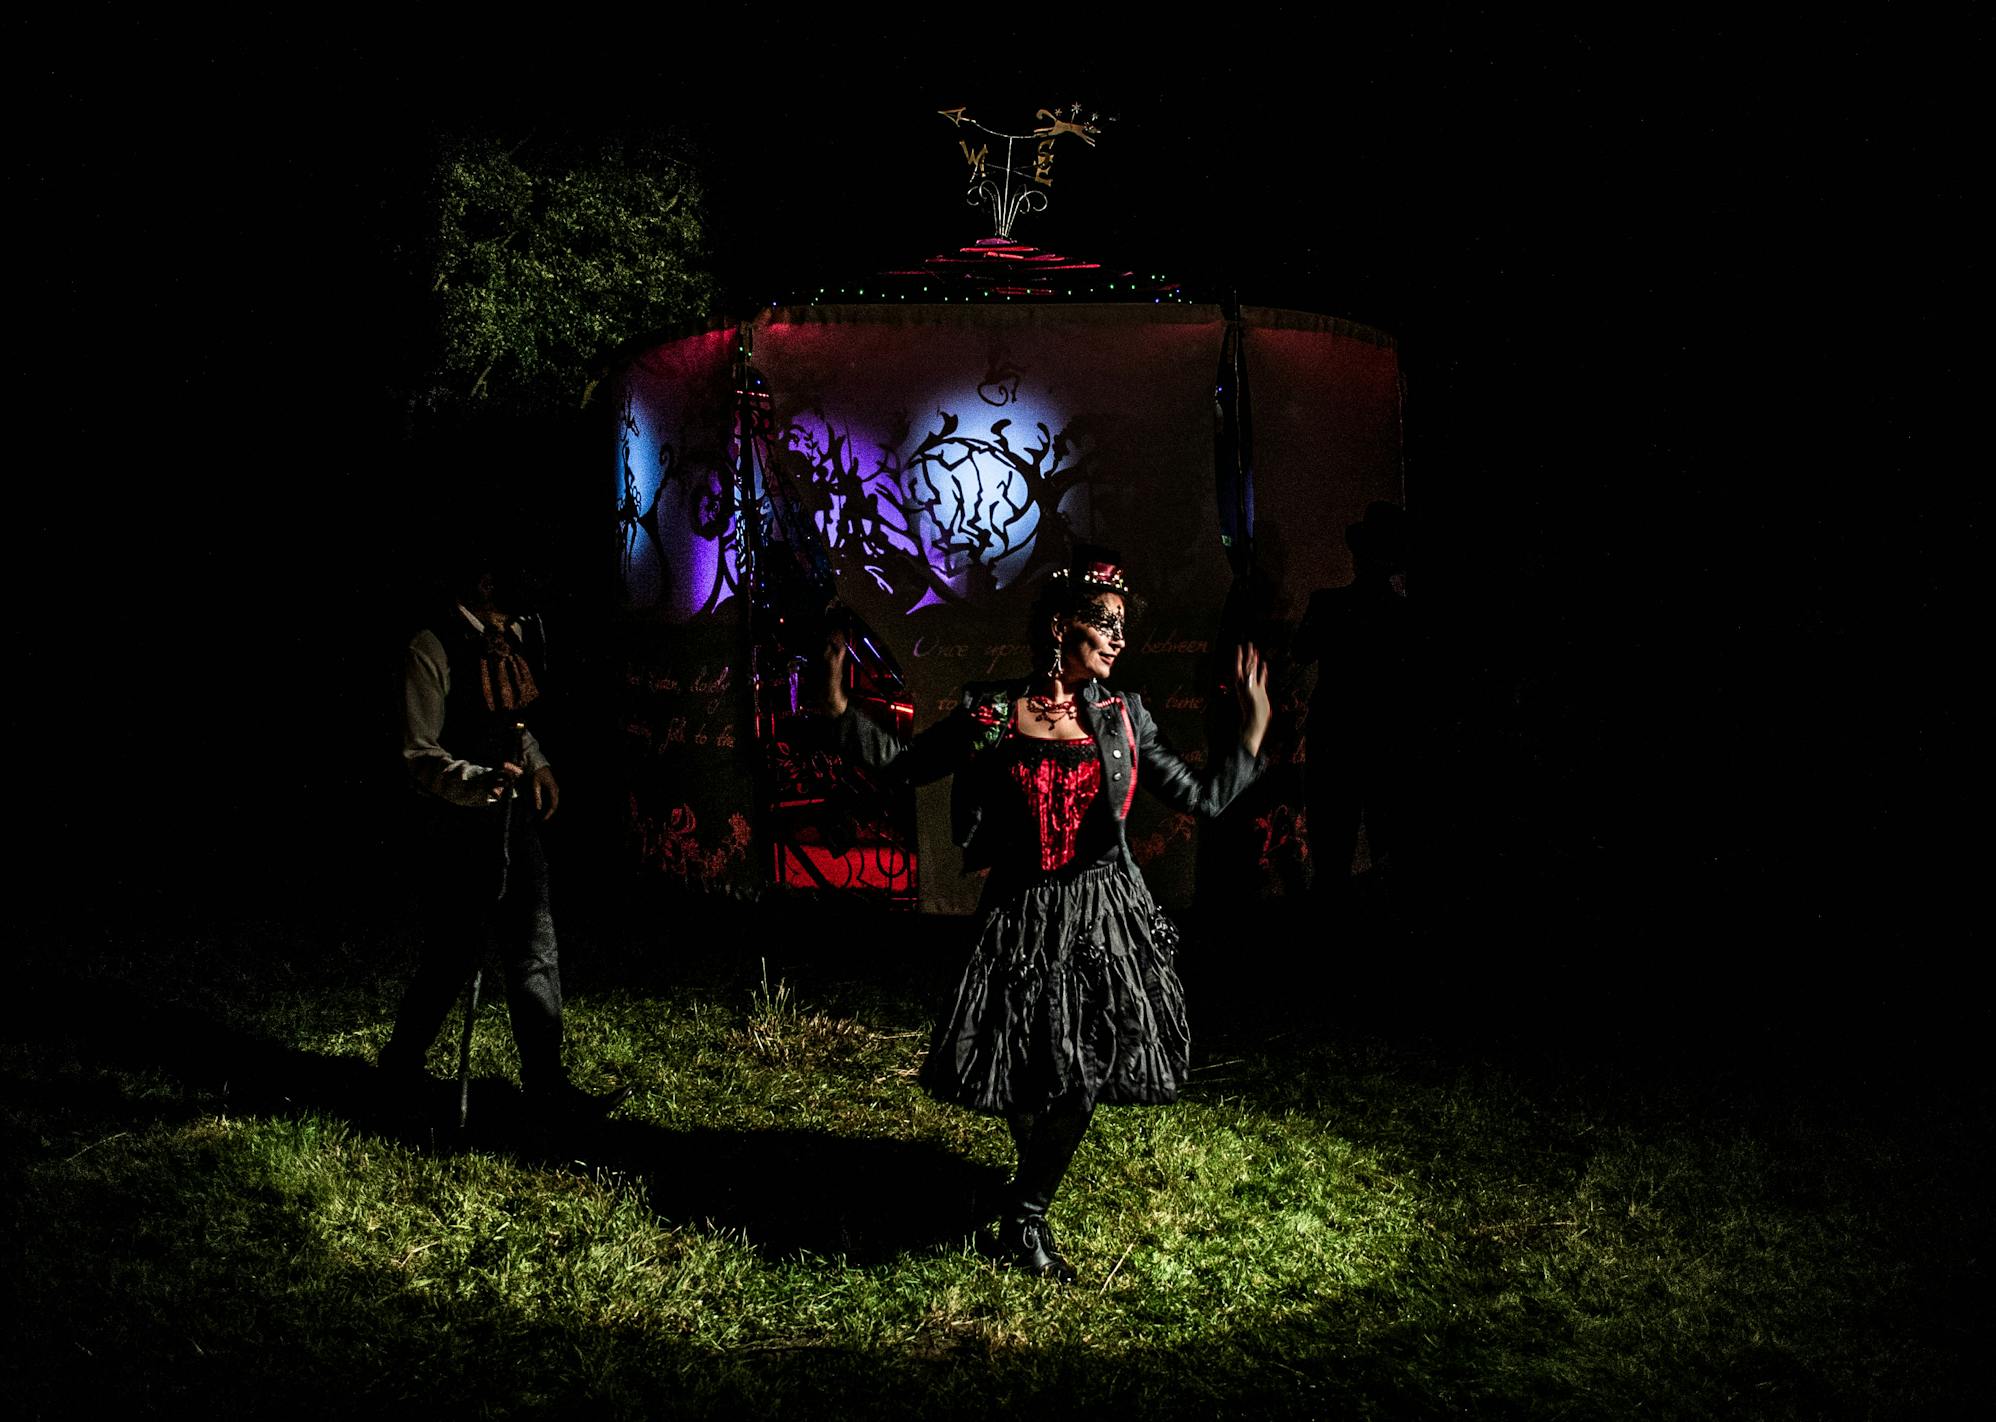 A woman in a black dress and mask standing in a spotlight on grass in front of a blue light with shadow puppets on it